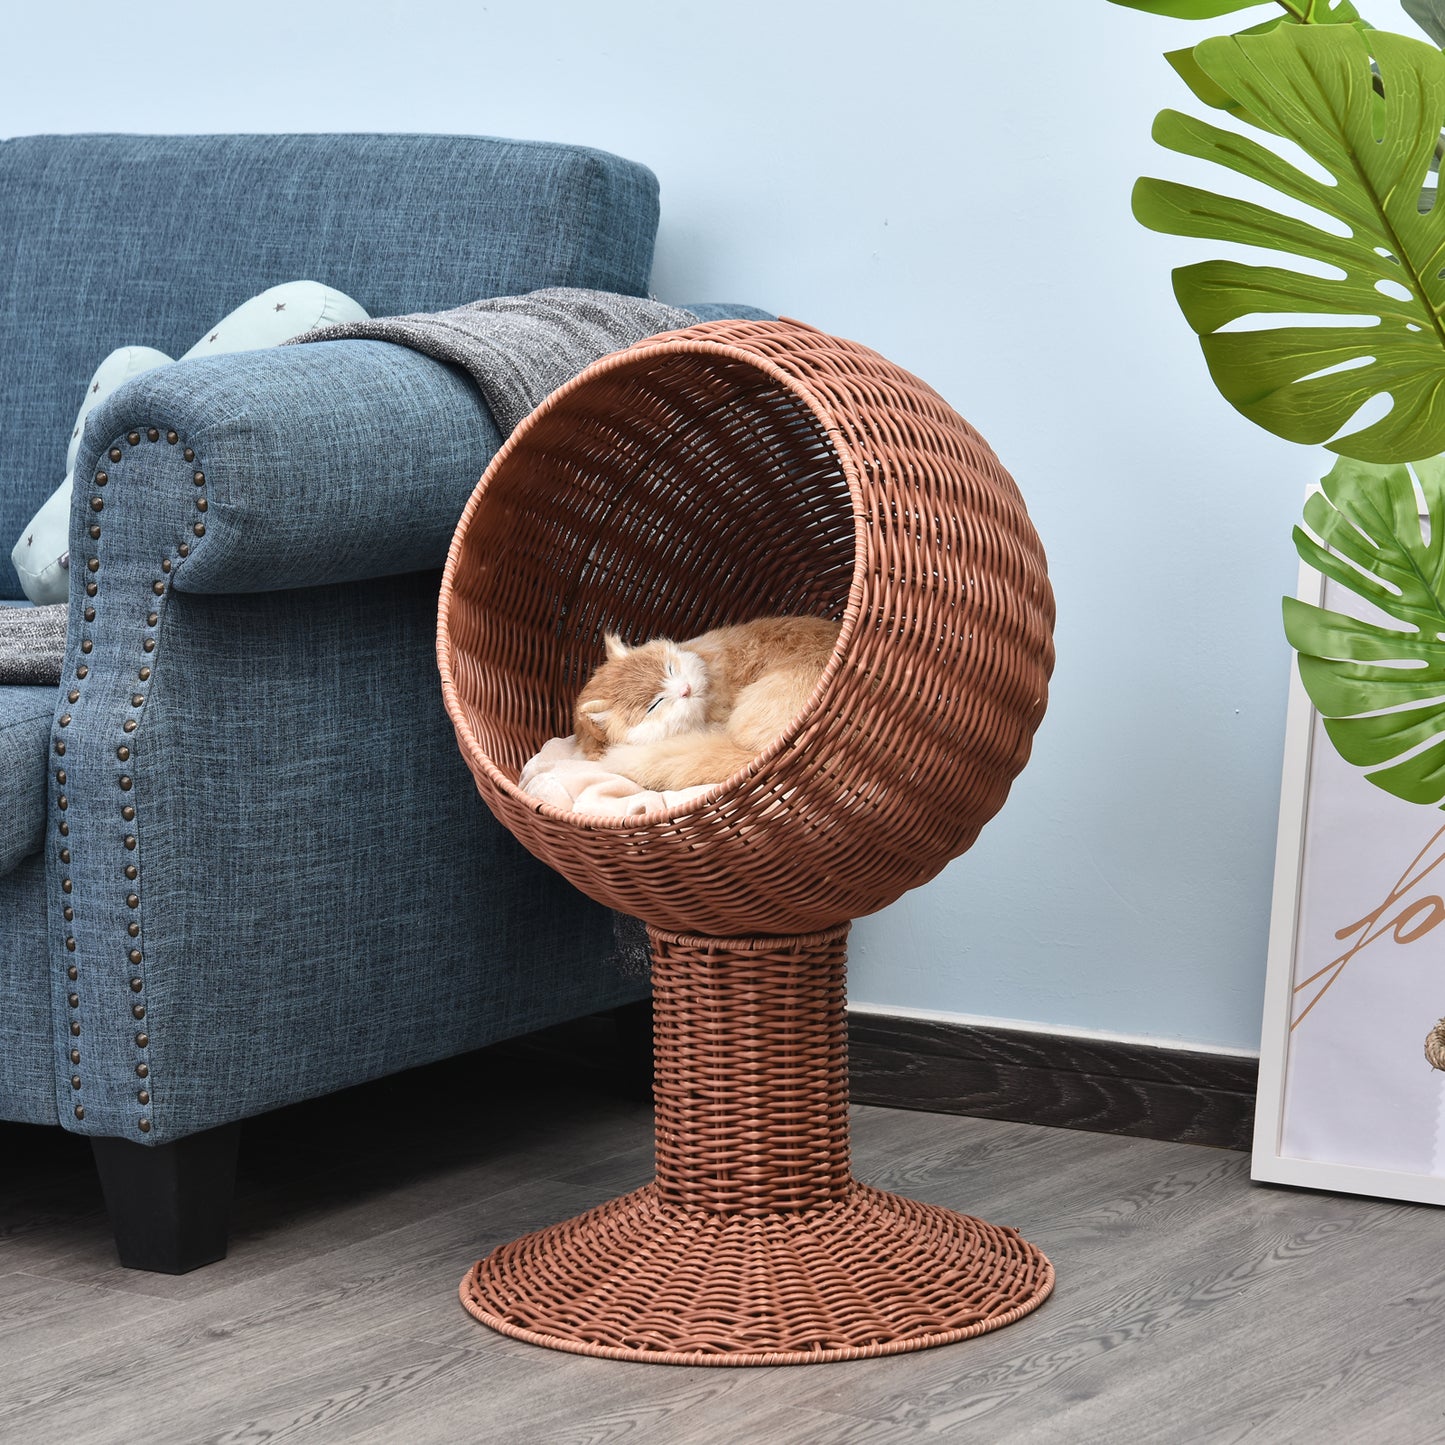 Pawhut 27" Rattan Wicker Elevated Pet Bed Cat Cave Condo Hooded Cushion